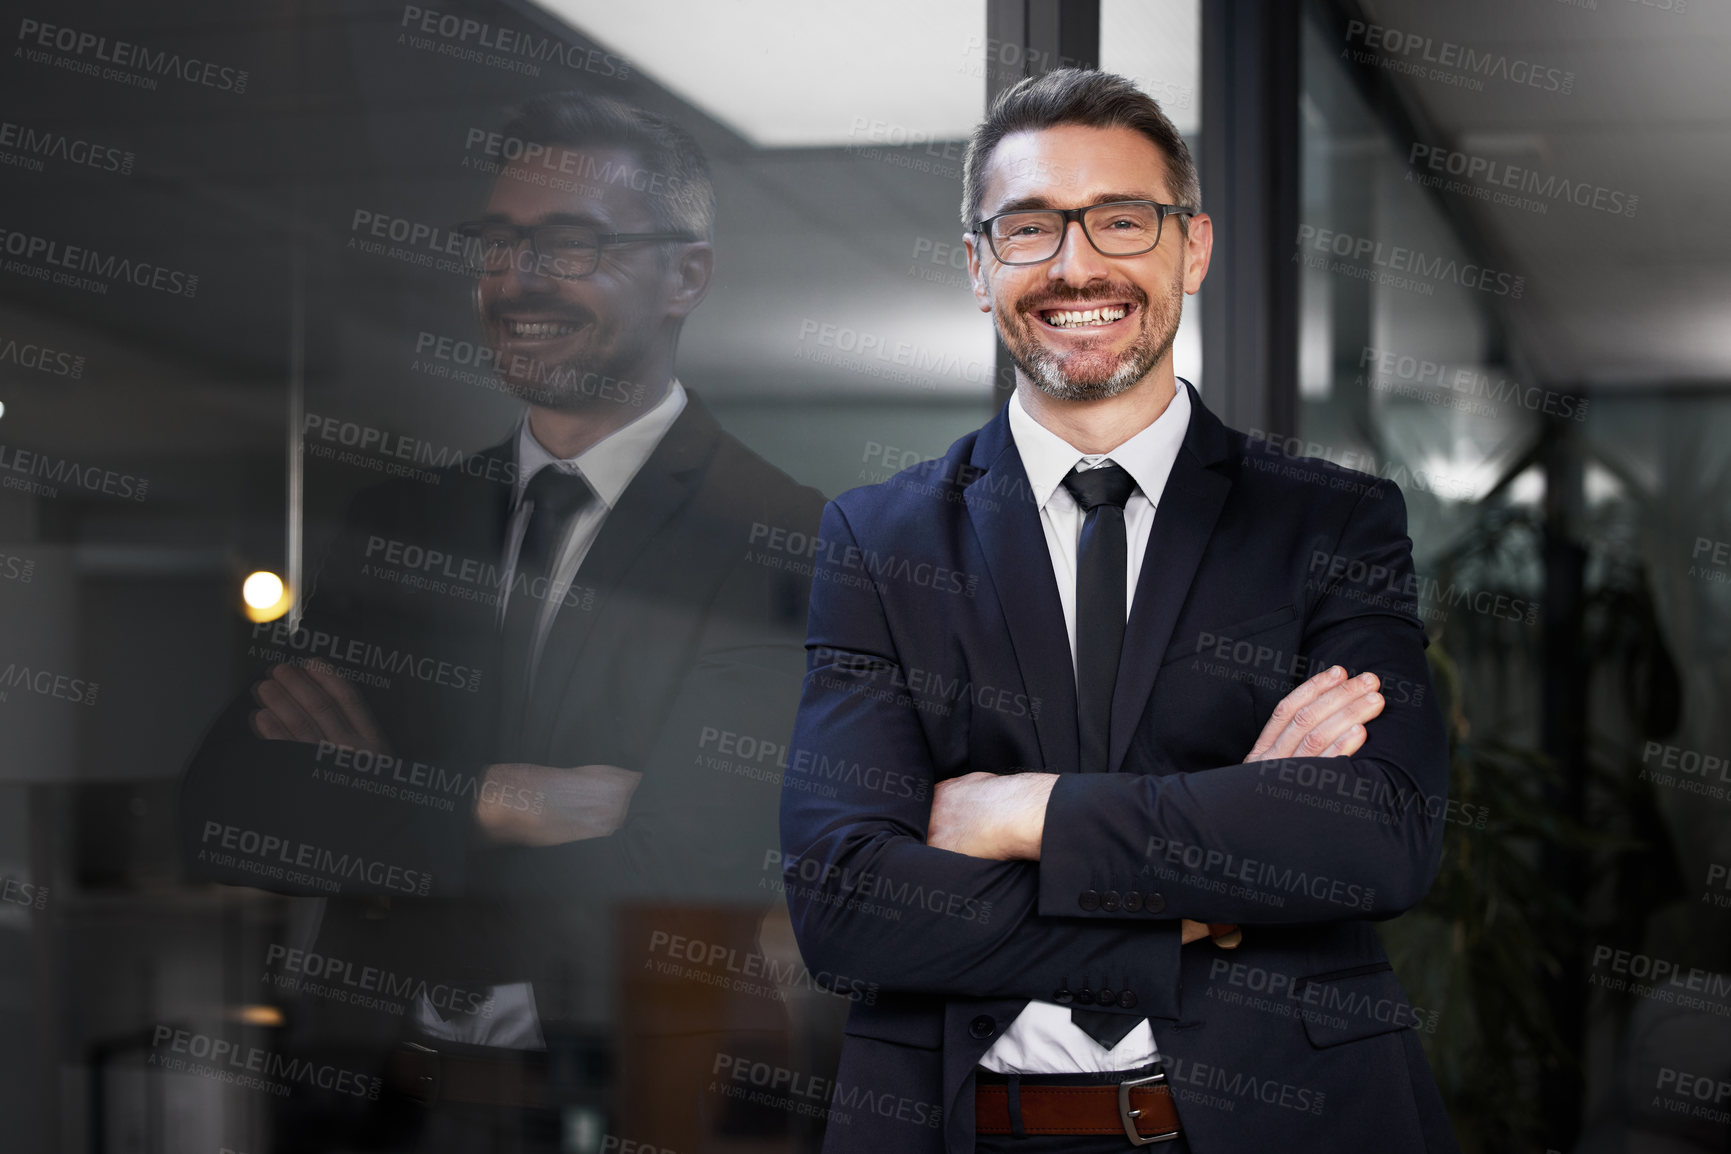 Buy stock photo Happy, portrait and mature businessman in office of law firm or company, professional and proud. Male entrepreneur or ceo of business, confident and excited for growth of legal agency and attorney